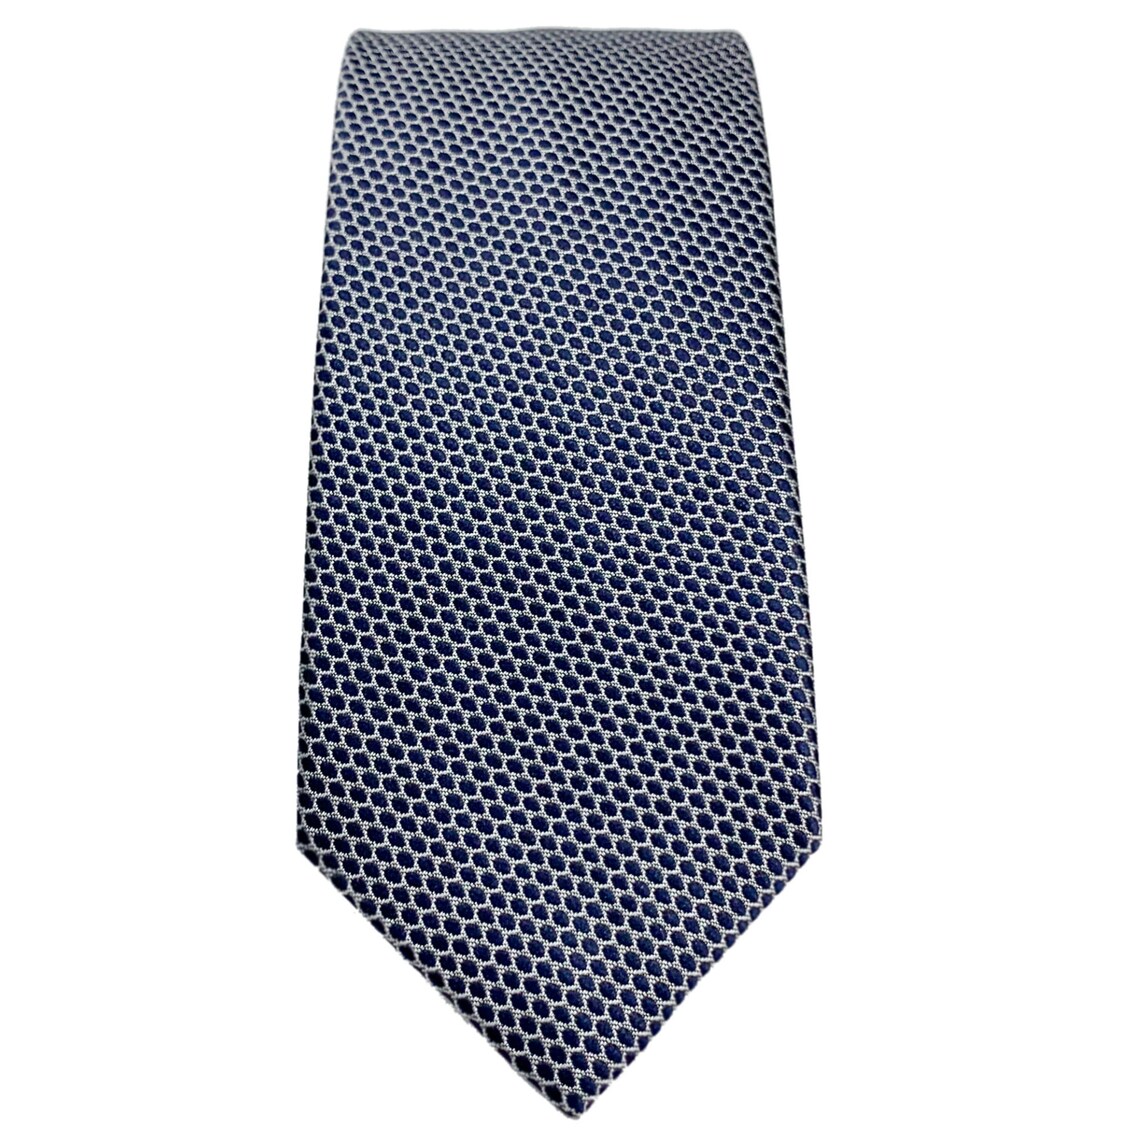 Gray Honeycomb Texture and Dark Red Dark Blue Dotted Tie - Etsy